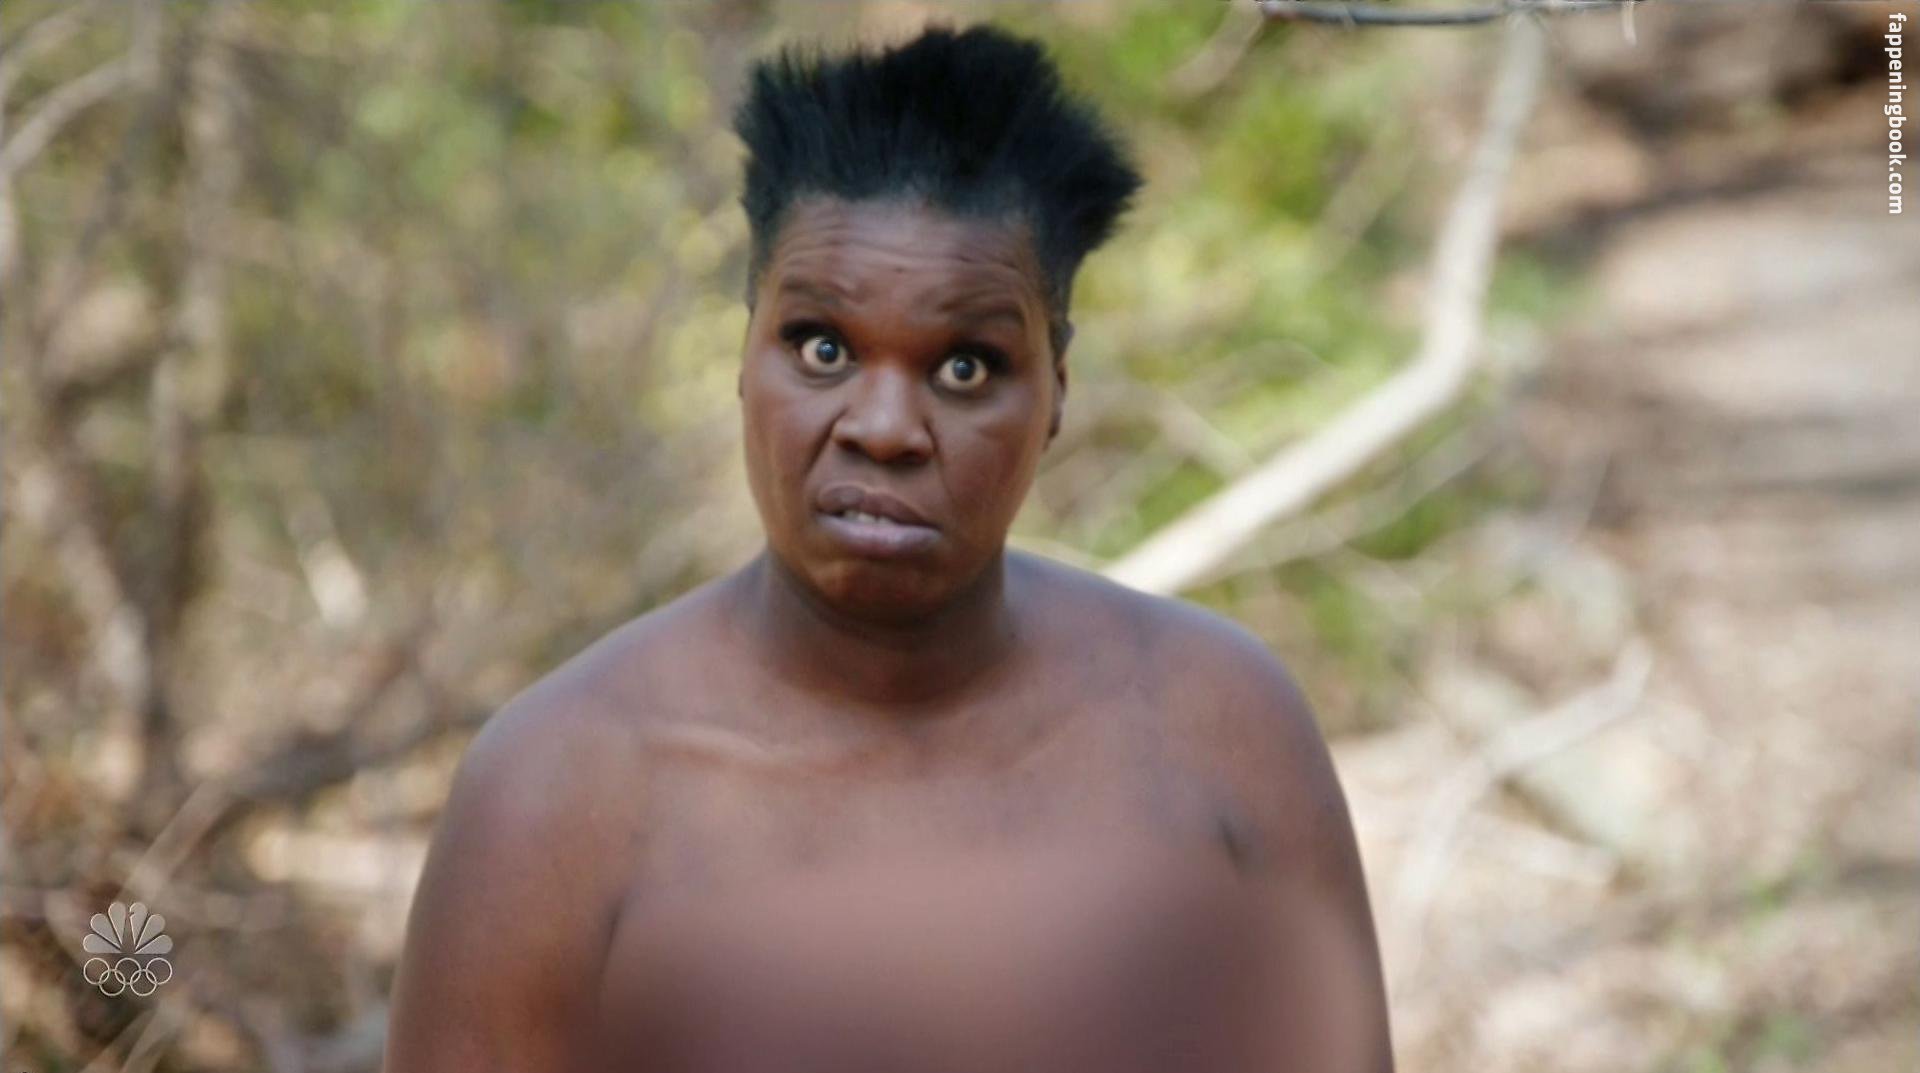 Naked pictures of leslie jones